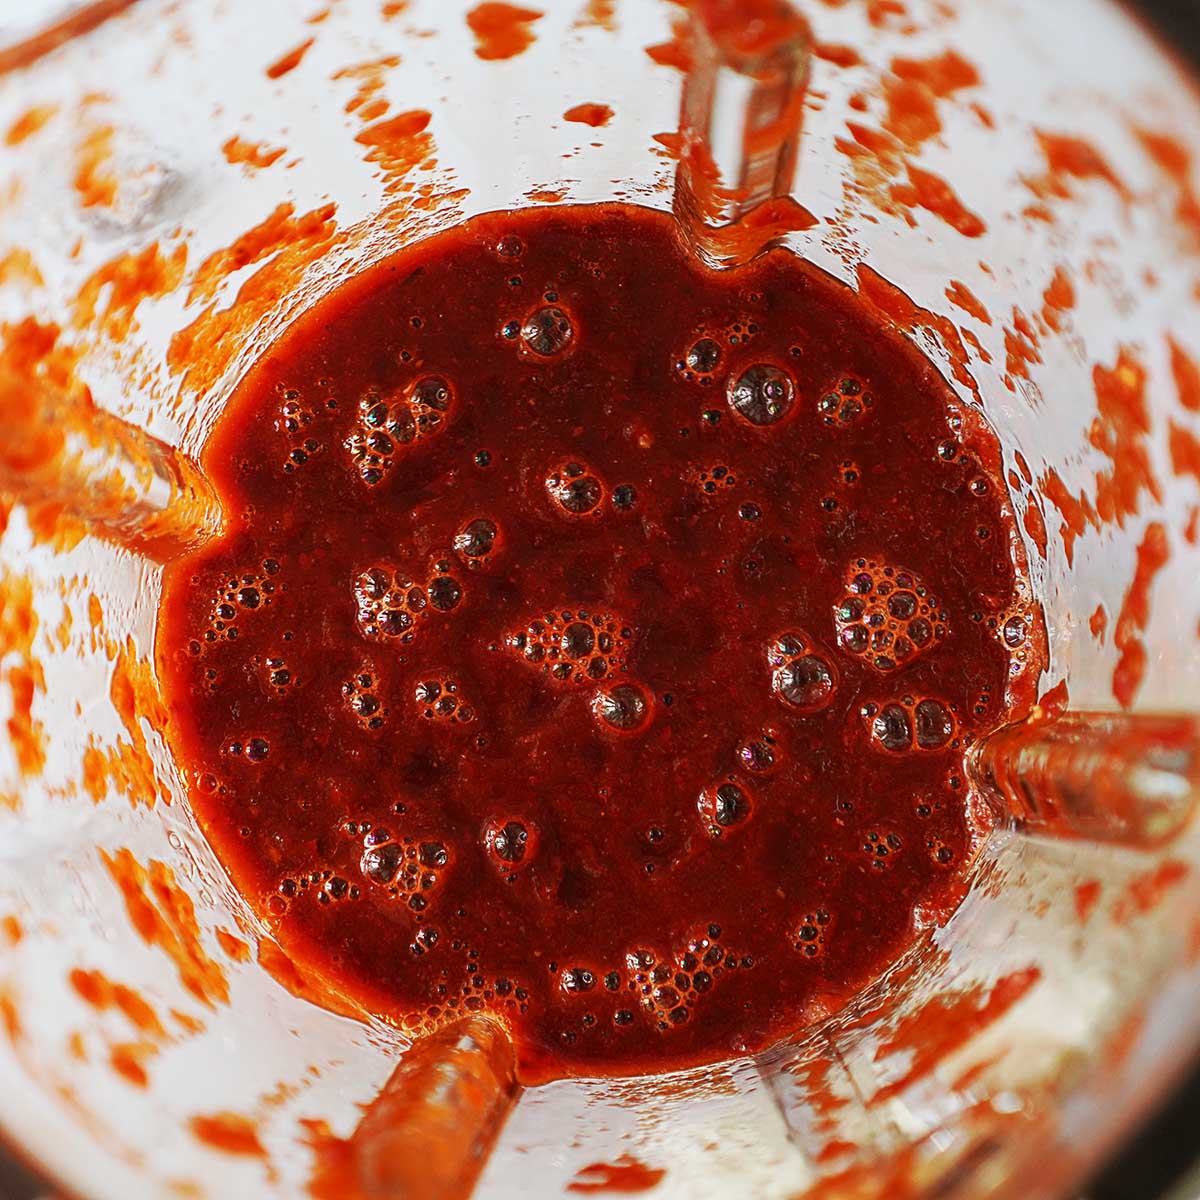 Pureed red sauce in a blender's glass.